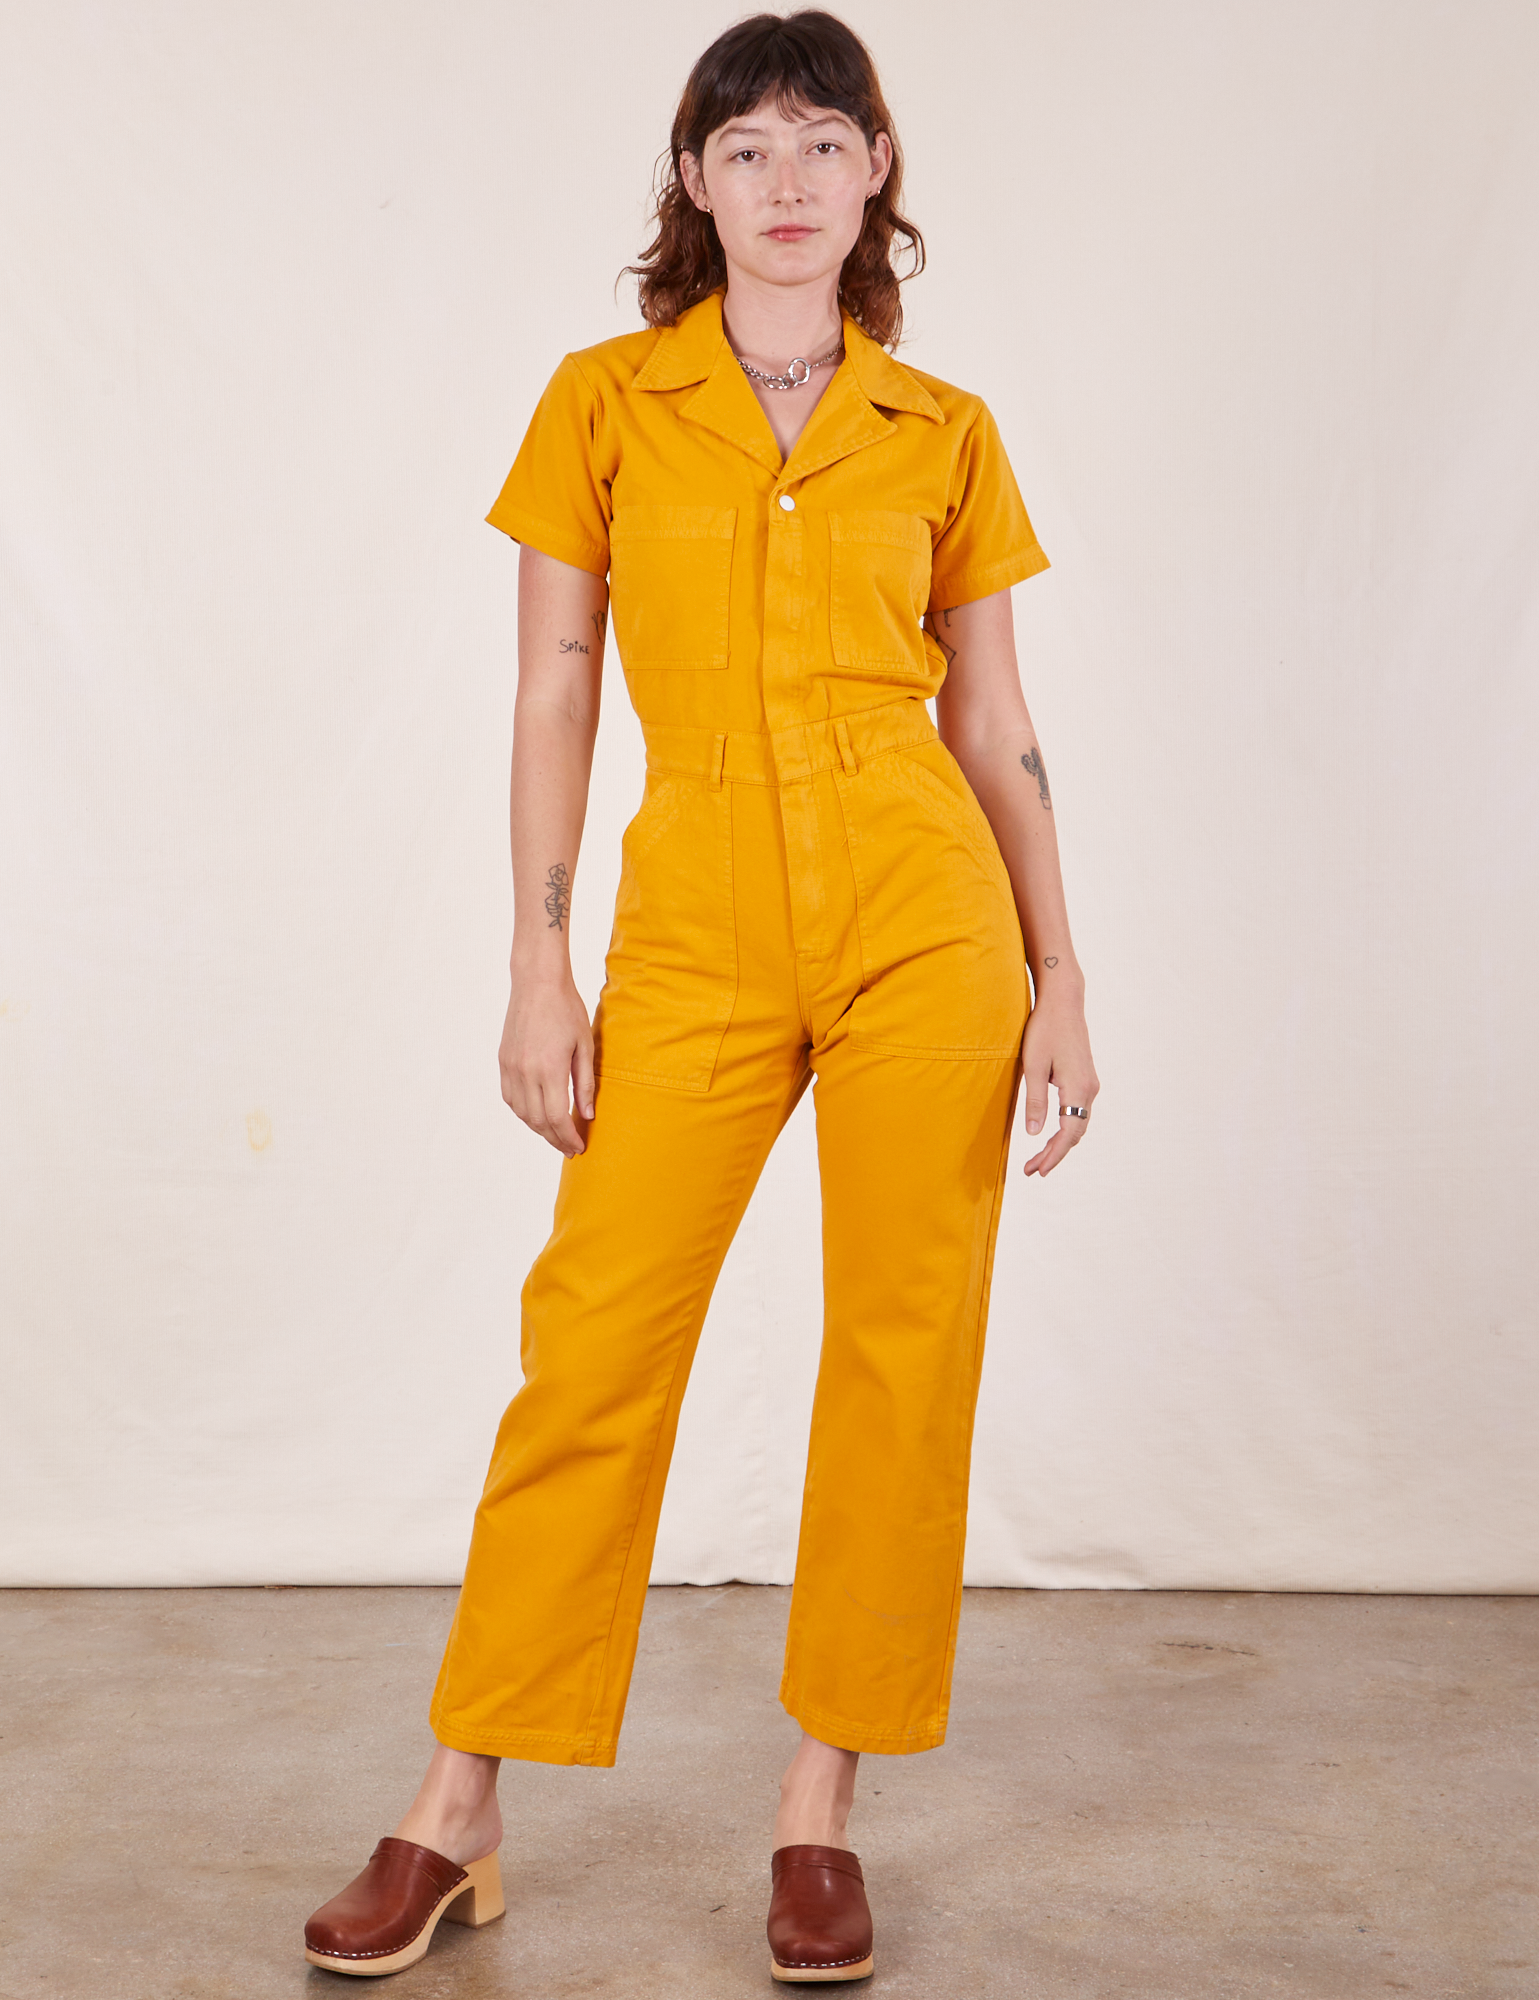 Alex is 5&#39;8&quot; and wearing XS Short Sleeve Jumpsuit in Mustard Yellow